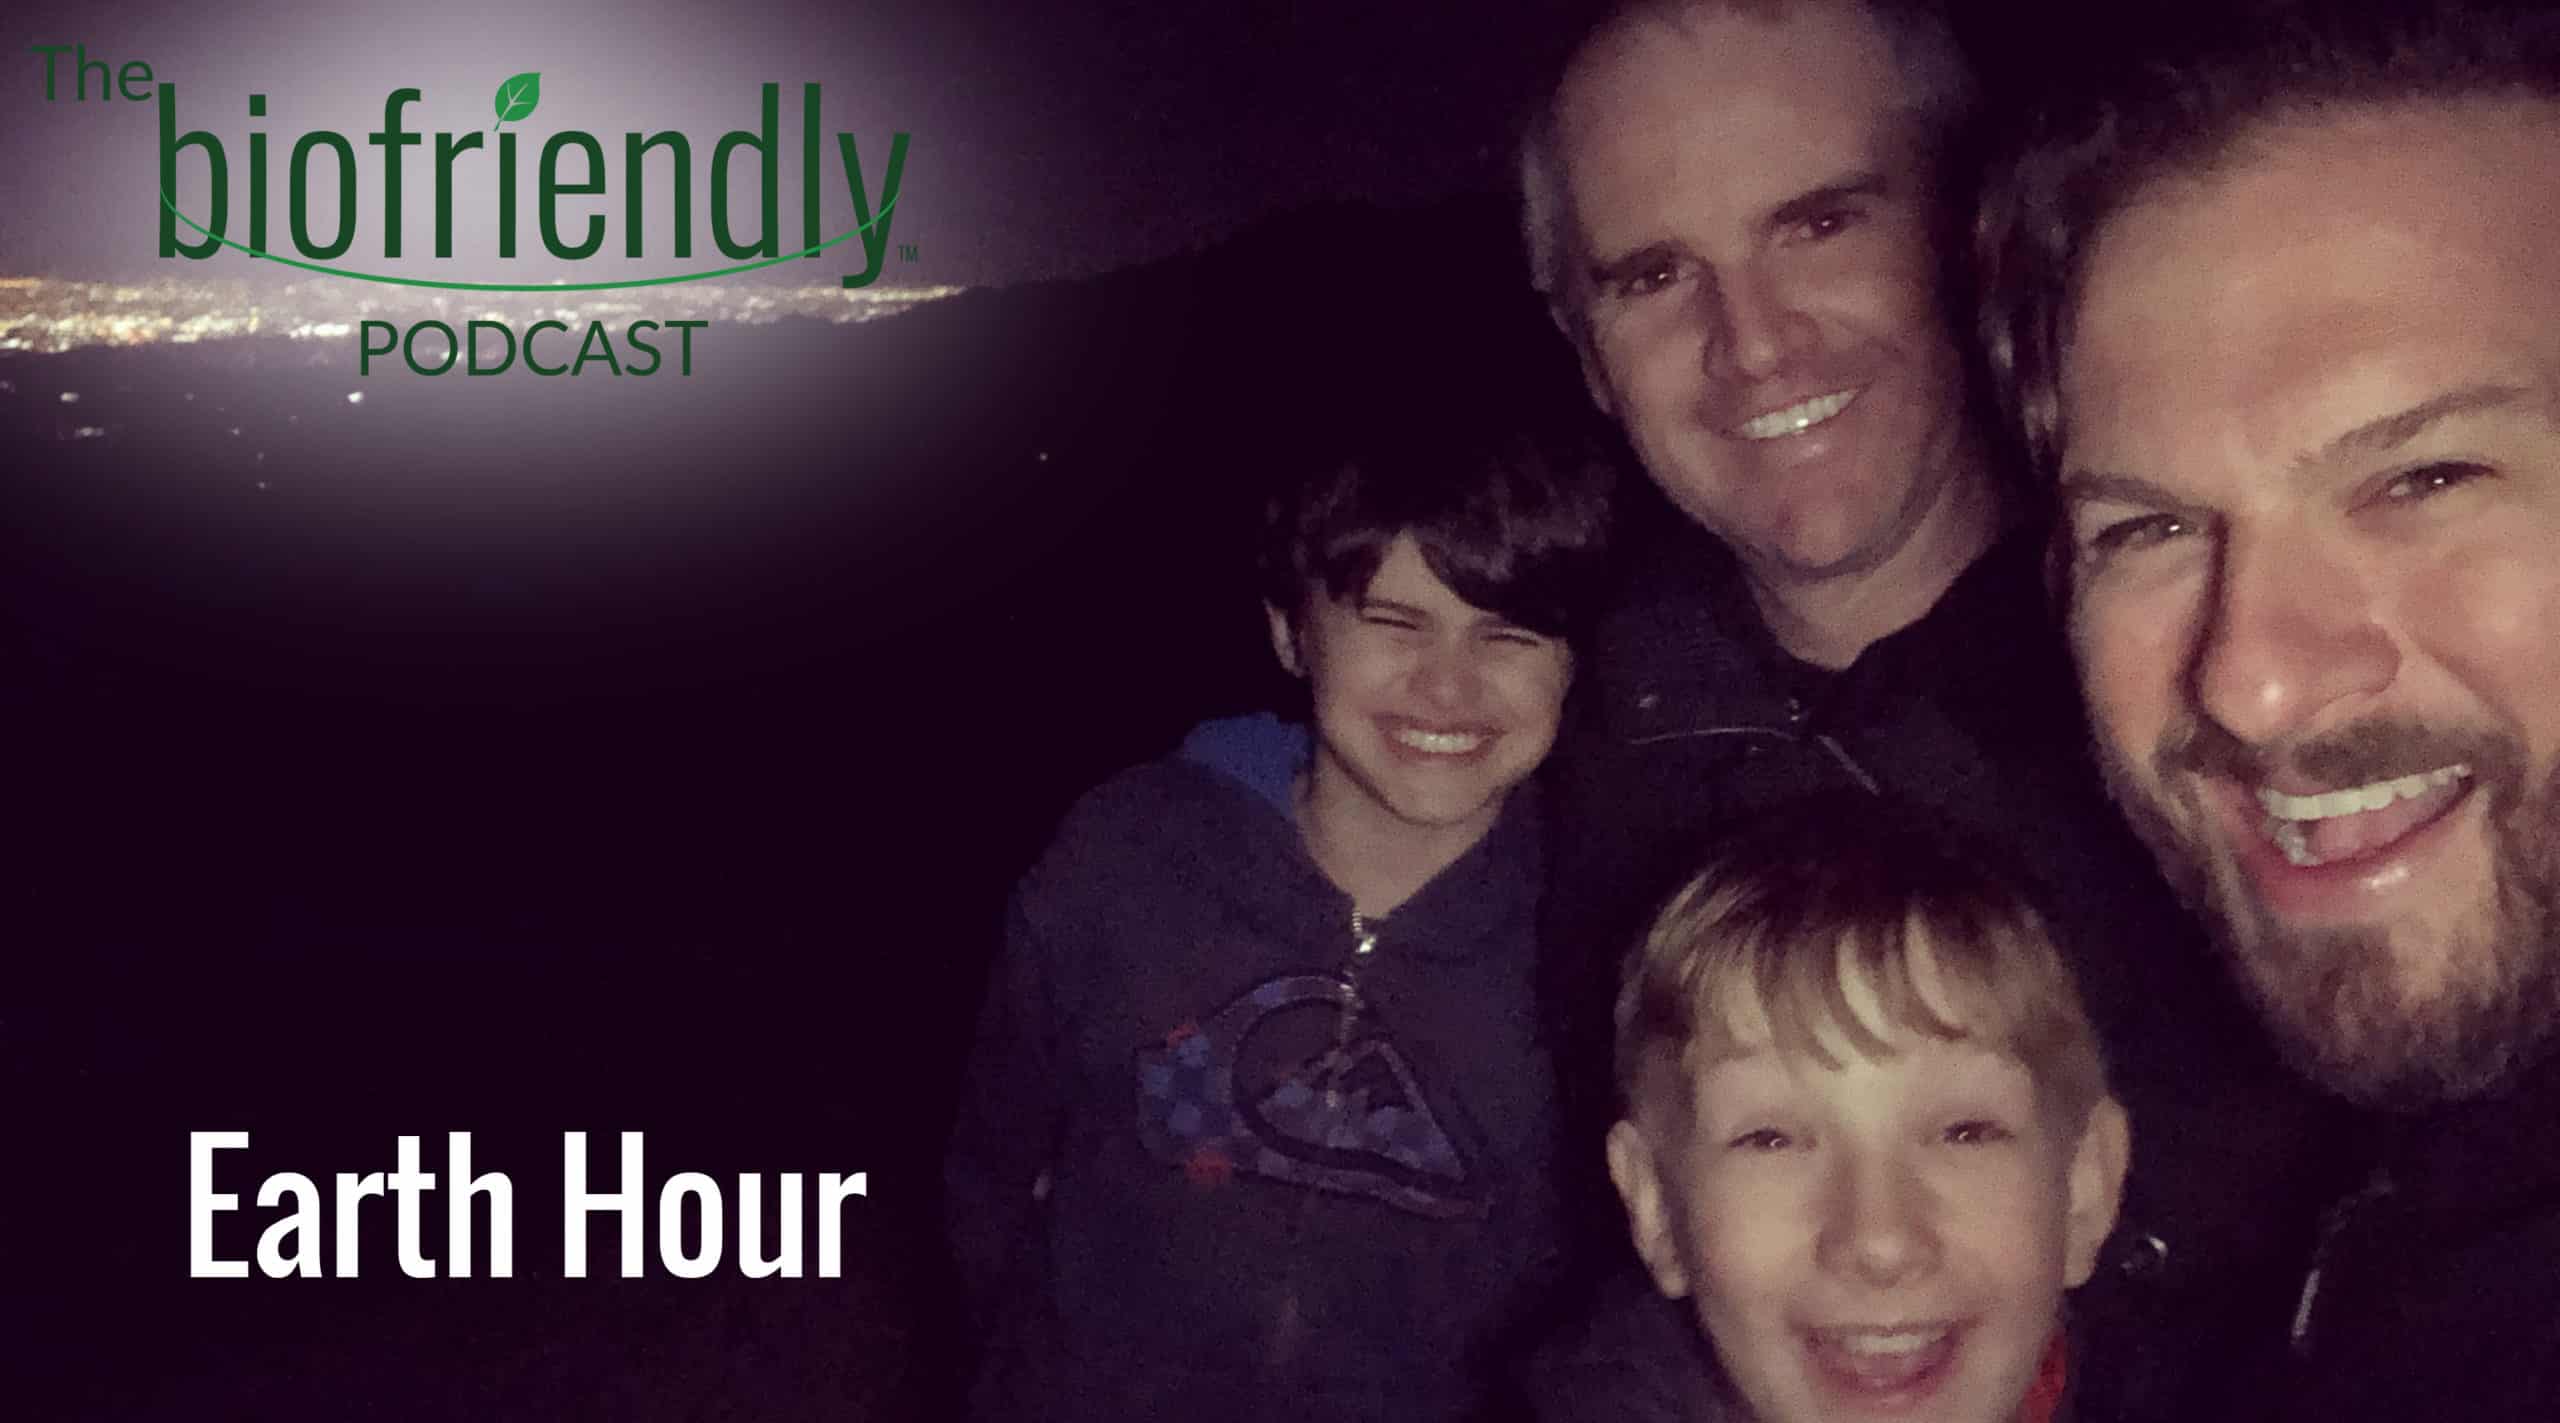 The Biofriendly Podcast - Earth Hour